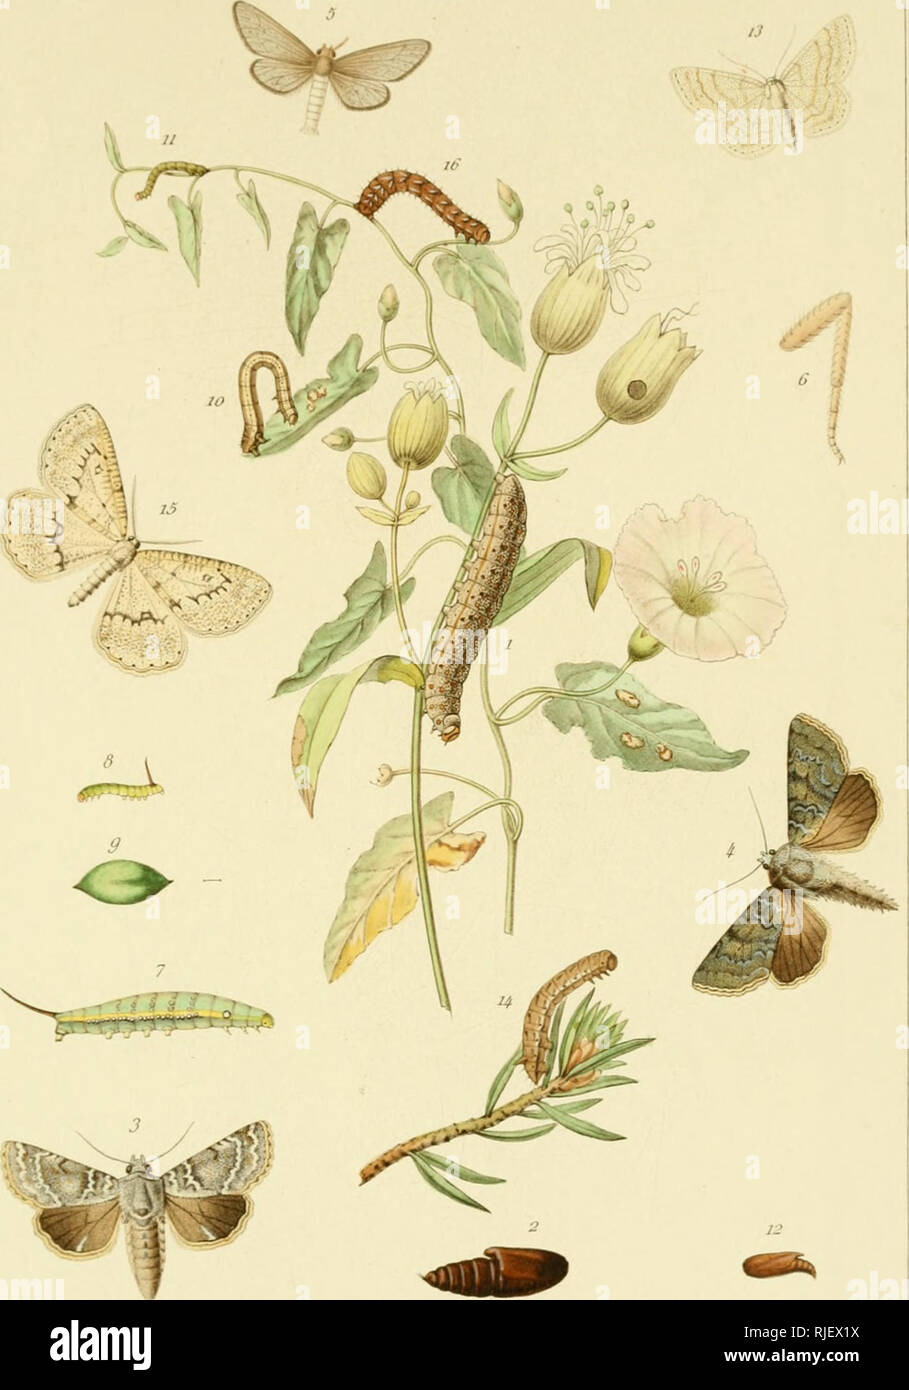 . Catalogue raisonné des l'epidoptres des Alpes-Maritimes. et notes entomologiques diverses. Lepidoptera -- Maritime Alps (France and Italy). ANNO VI IL NATURALISTA SICILIANO TAV. 1 .1886.. Pou/aJ» et F Jlfi/Uère /-i 1 a 4. Dianthoecia Caesia. Bkh. b et 6. Psilothrix. Incerta j.Mill. 7. Deilephila Nerii L. 8 et 9 id Celerio L. 10 a 13. Acidalia Fumata. Steph. 14 et 15. Gnophos Sordaria . Thnb 16. Cidaria Caesiata . S.V. type.. Please note that these images are extracted from scanned page images that may have been digitally enhanced for readability - coloration and appearance of these illustrat Stock Photo